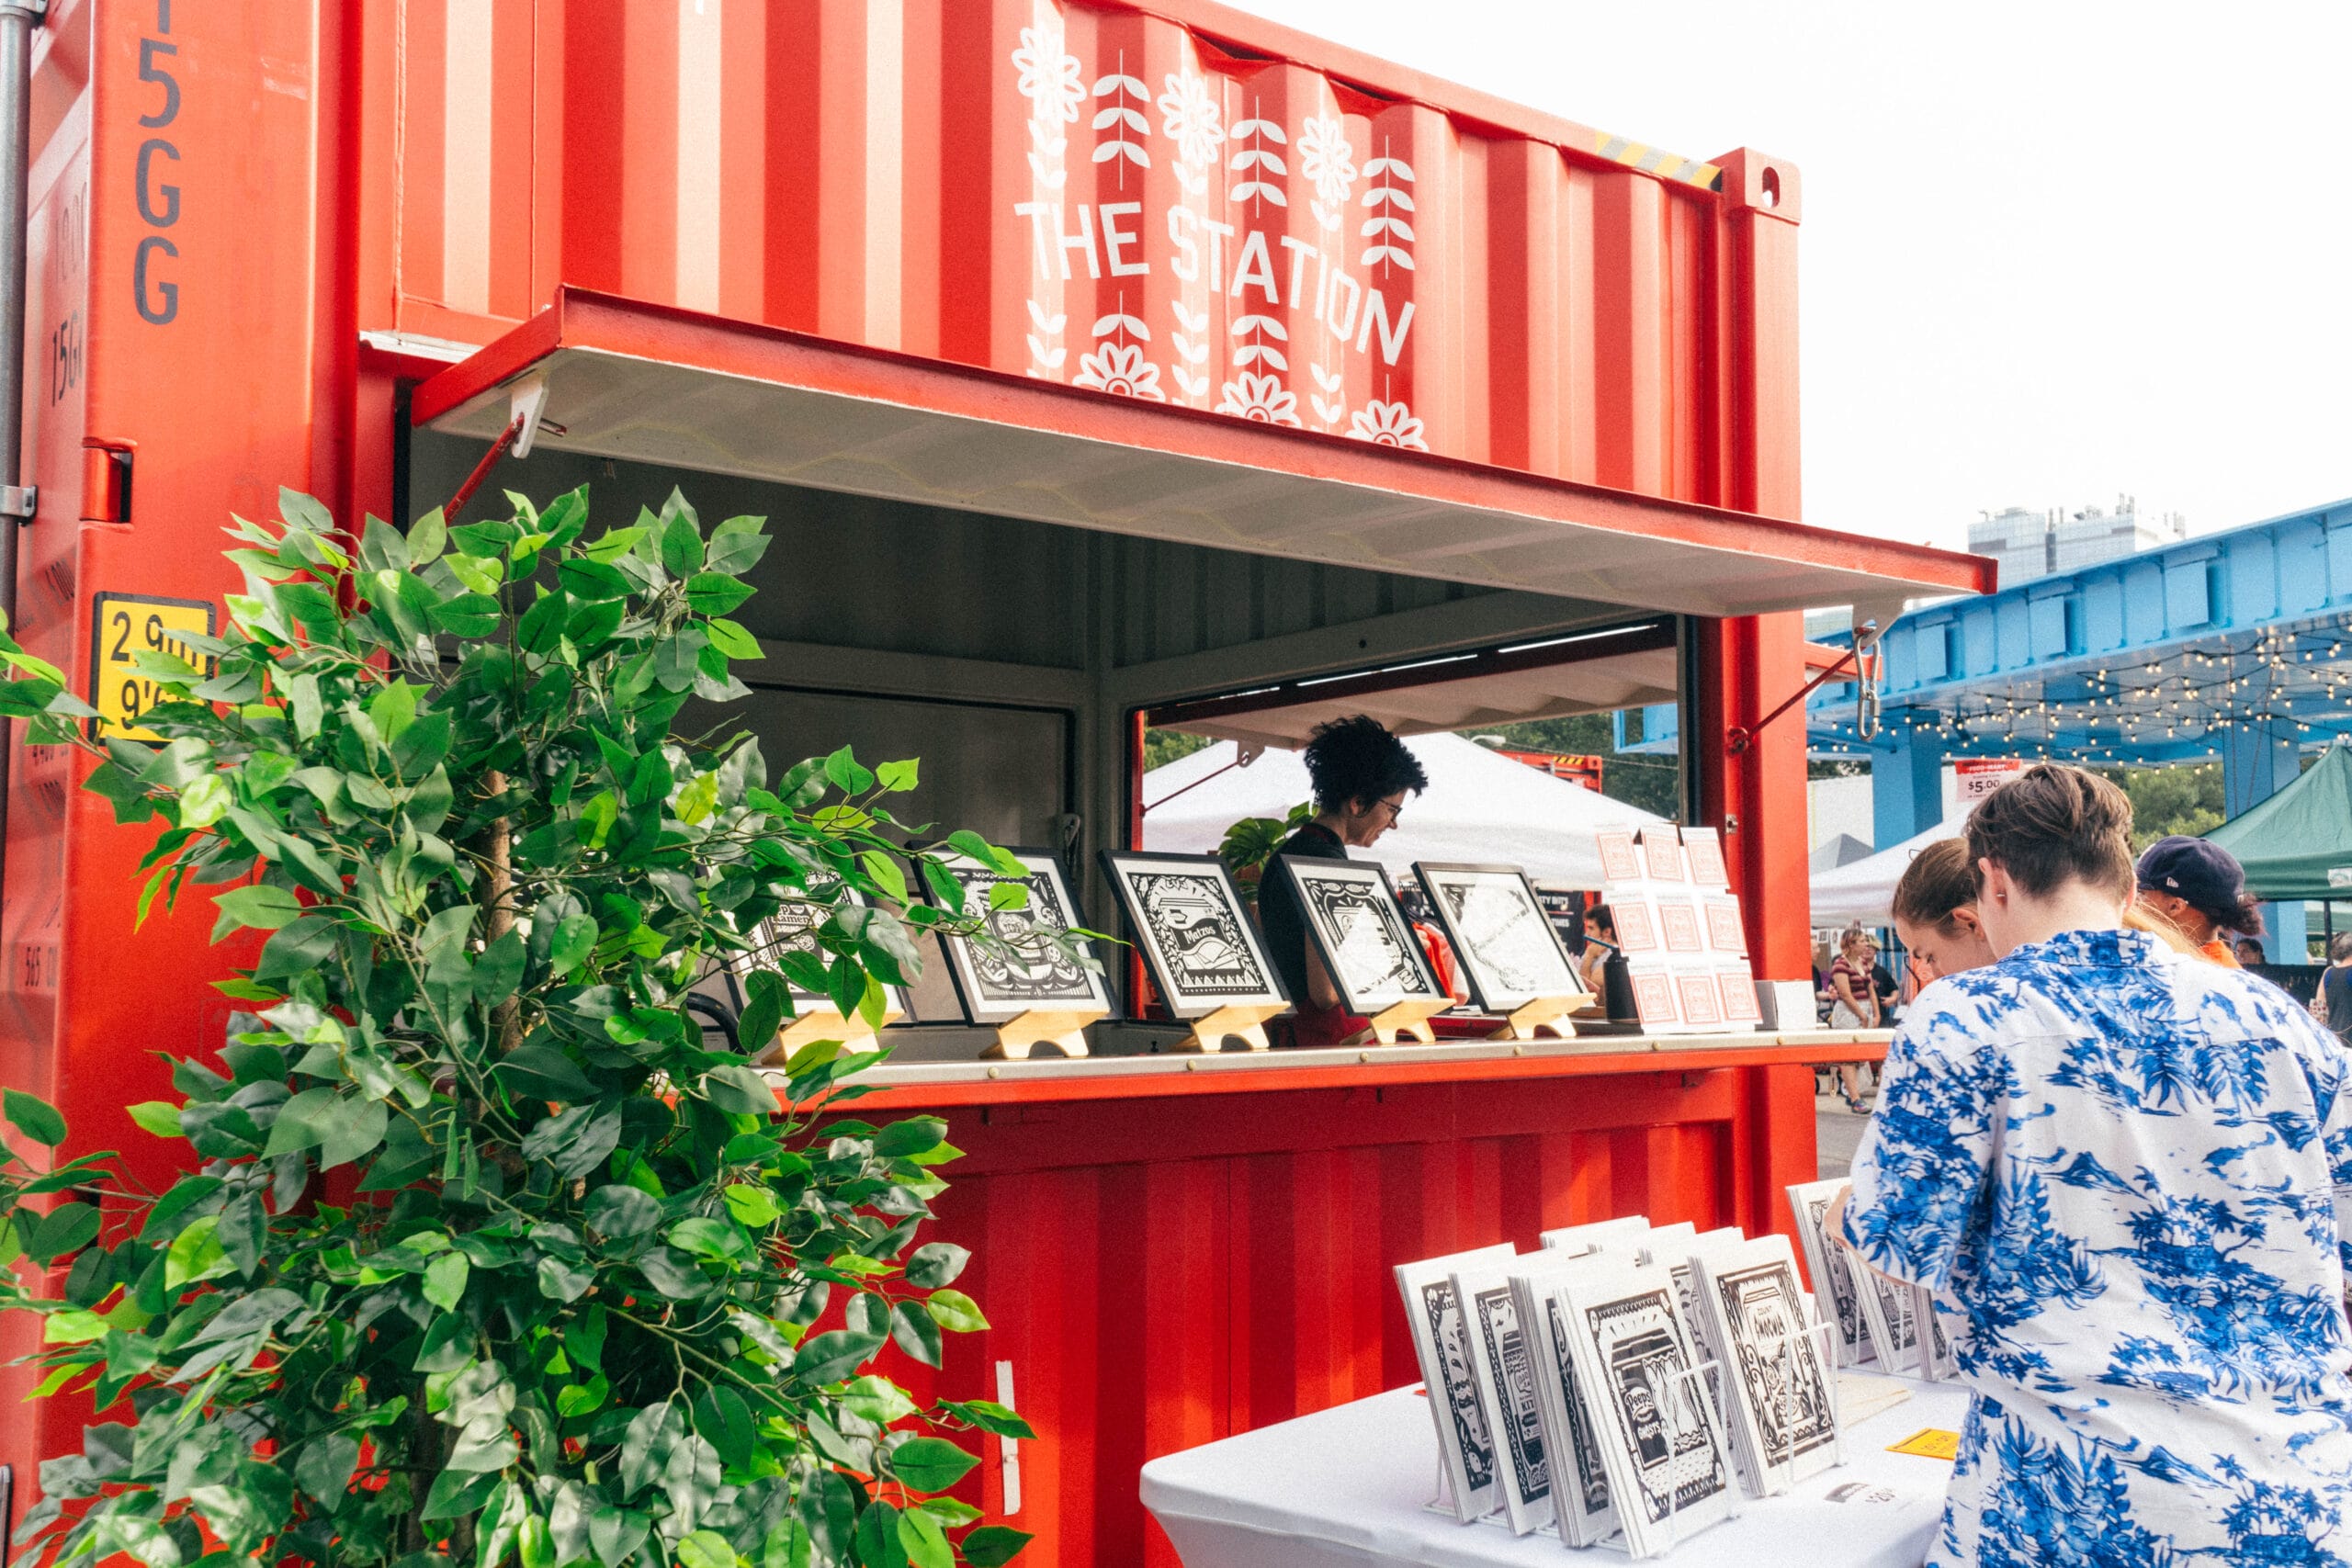 A red shipping crate showcases an artists' work at an outdoor art market.